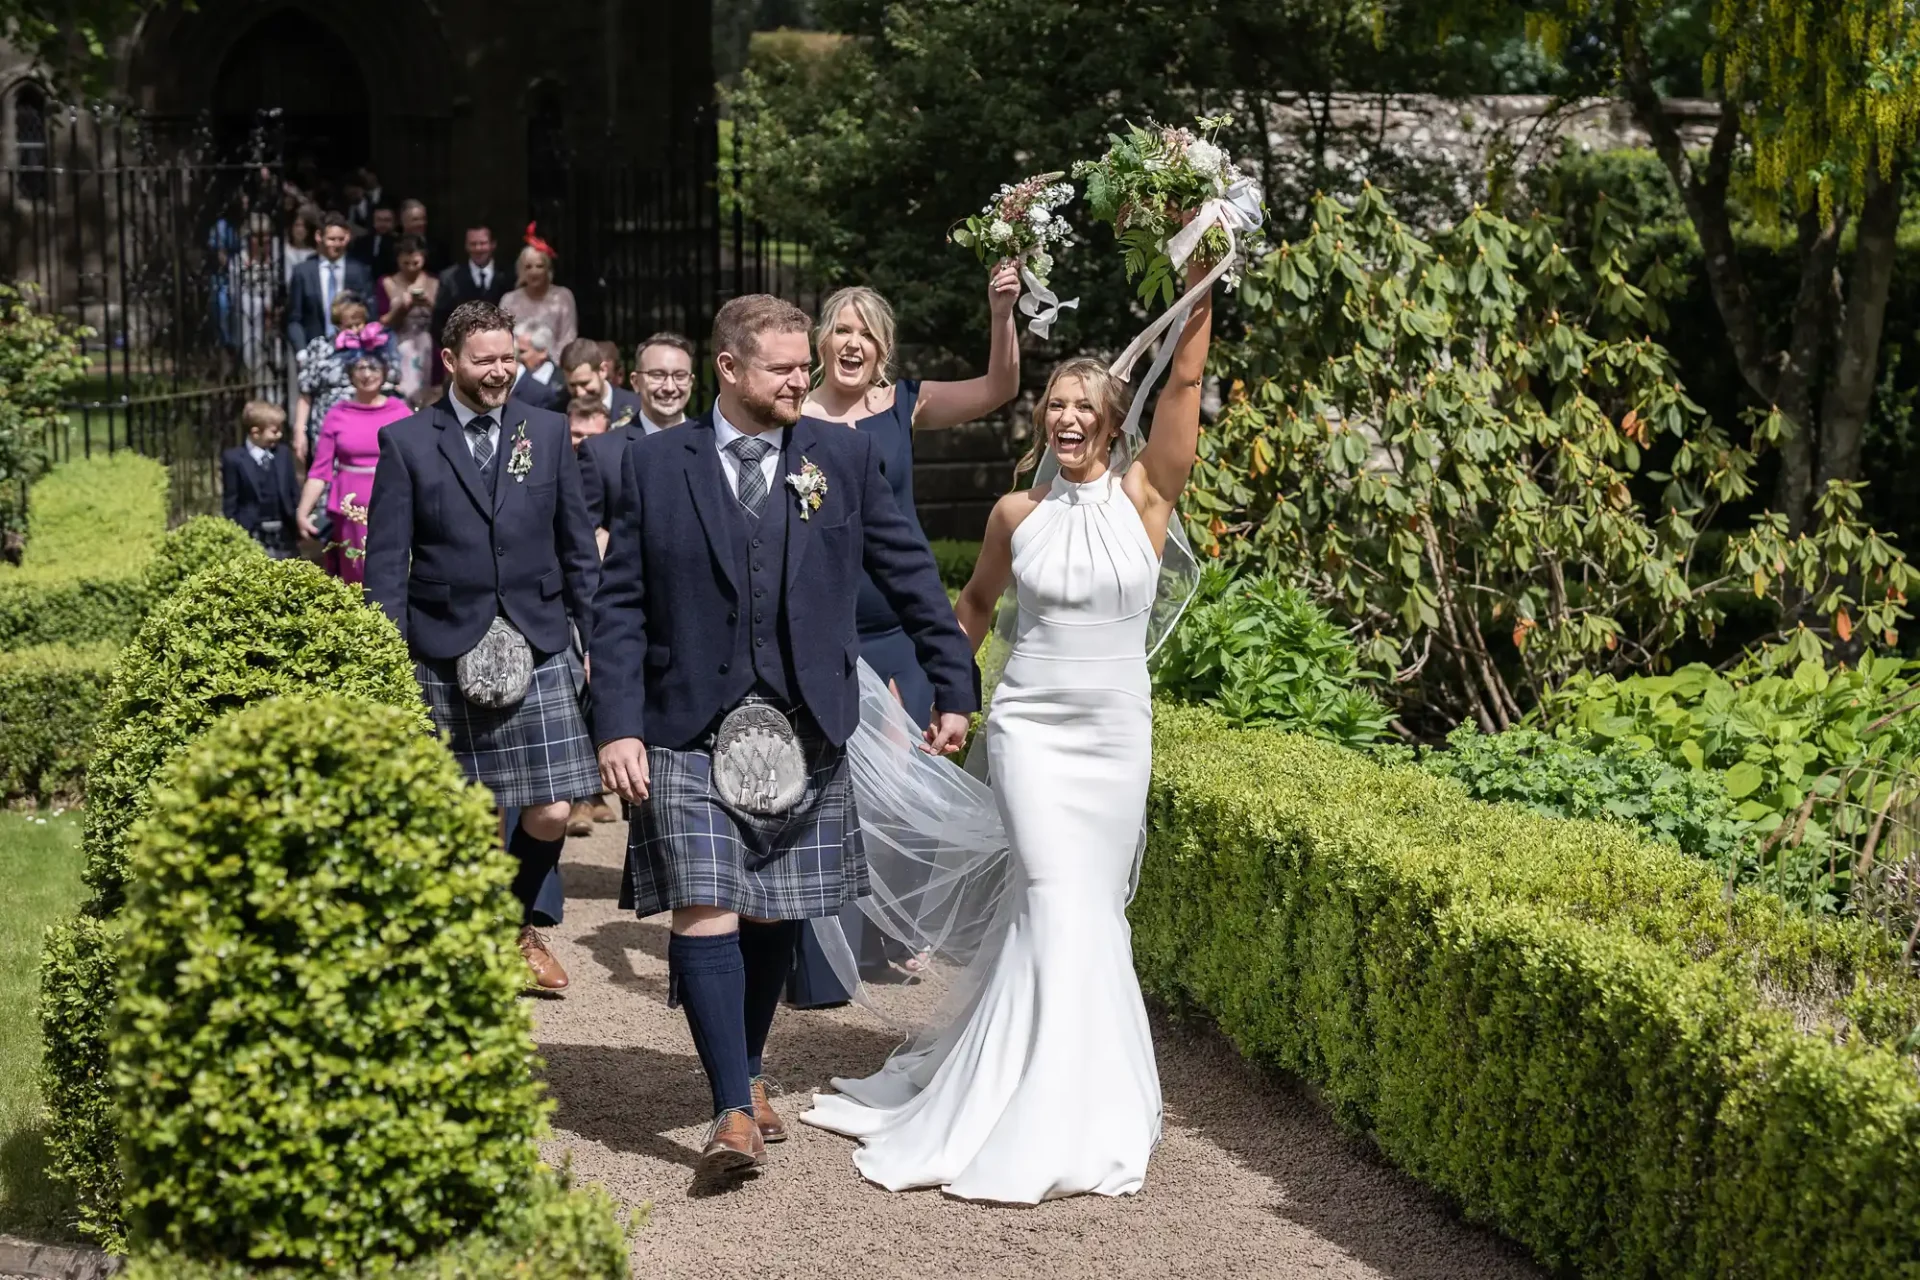 A joyful bride and groom walk hand in hand, leading guests down a garden path after their ceremony.